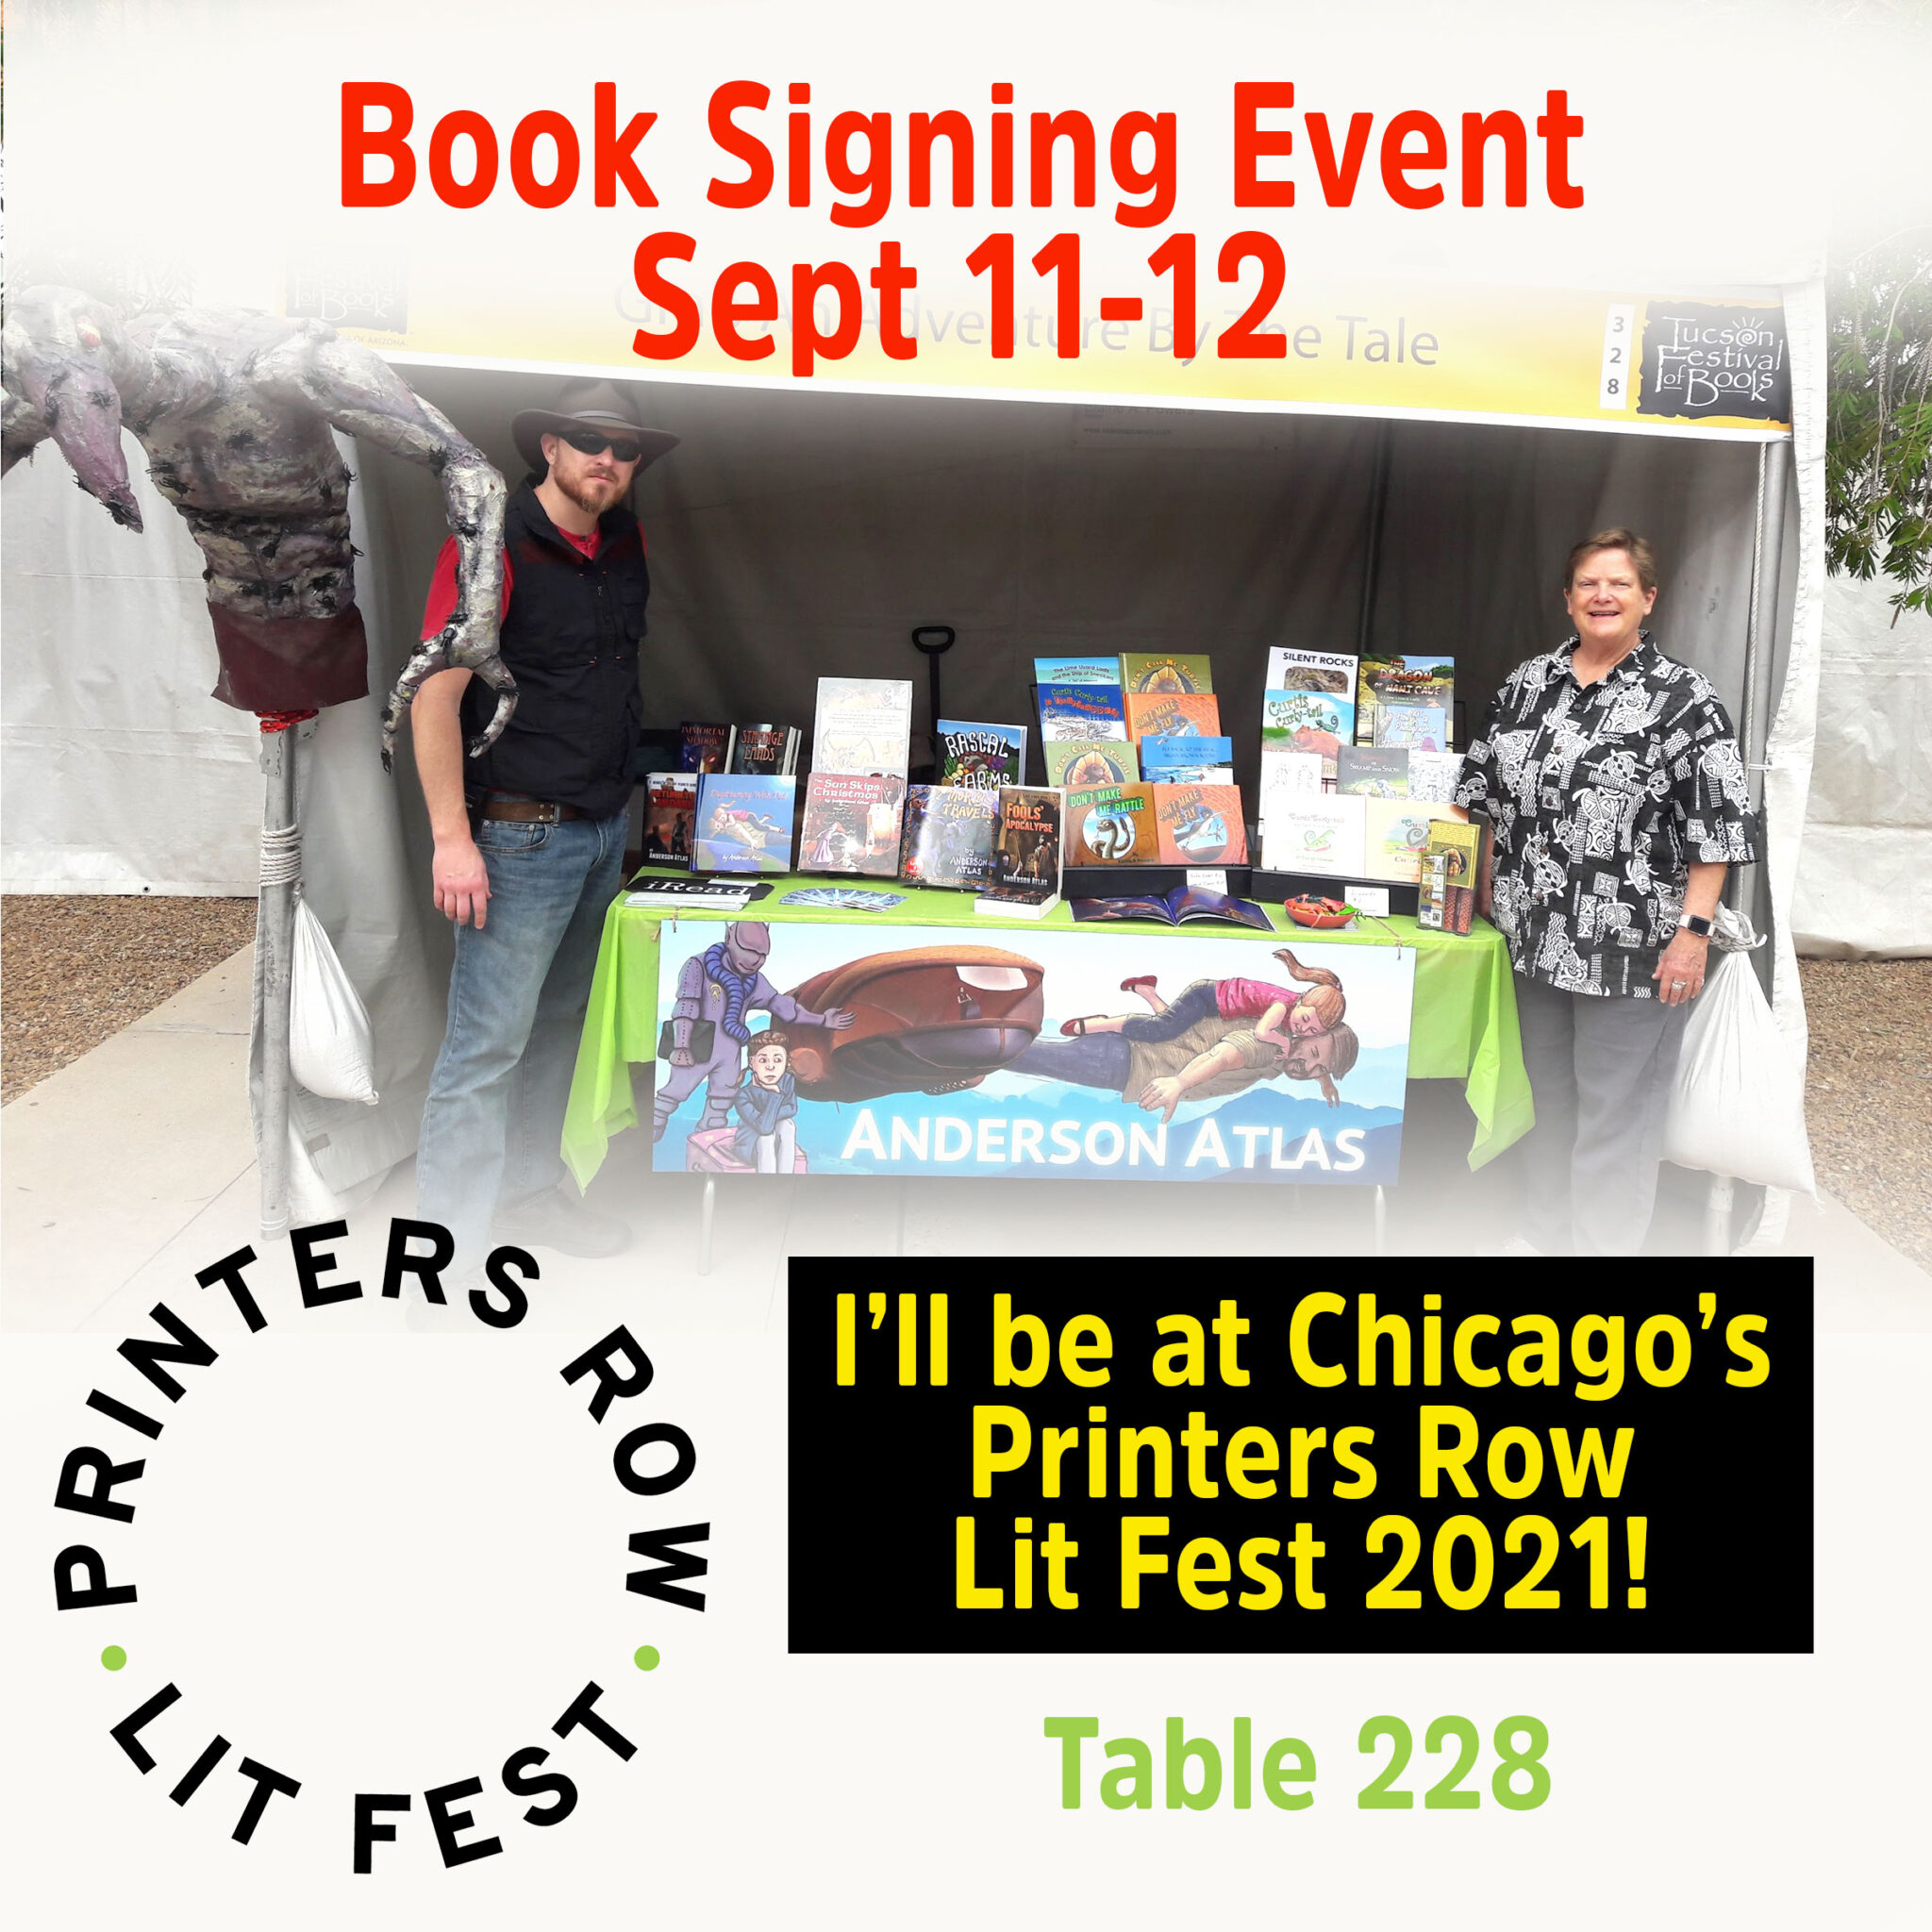 Chicago's Printers Row Lit Fest 2021 is on! ANDERSON ATLAS Author